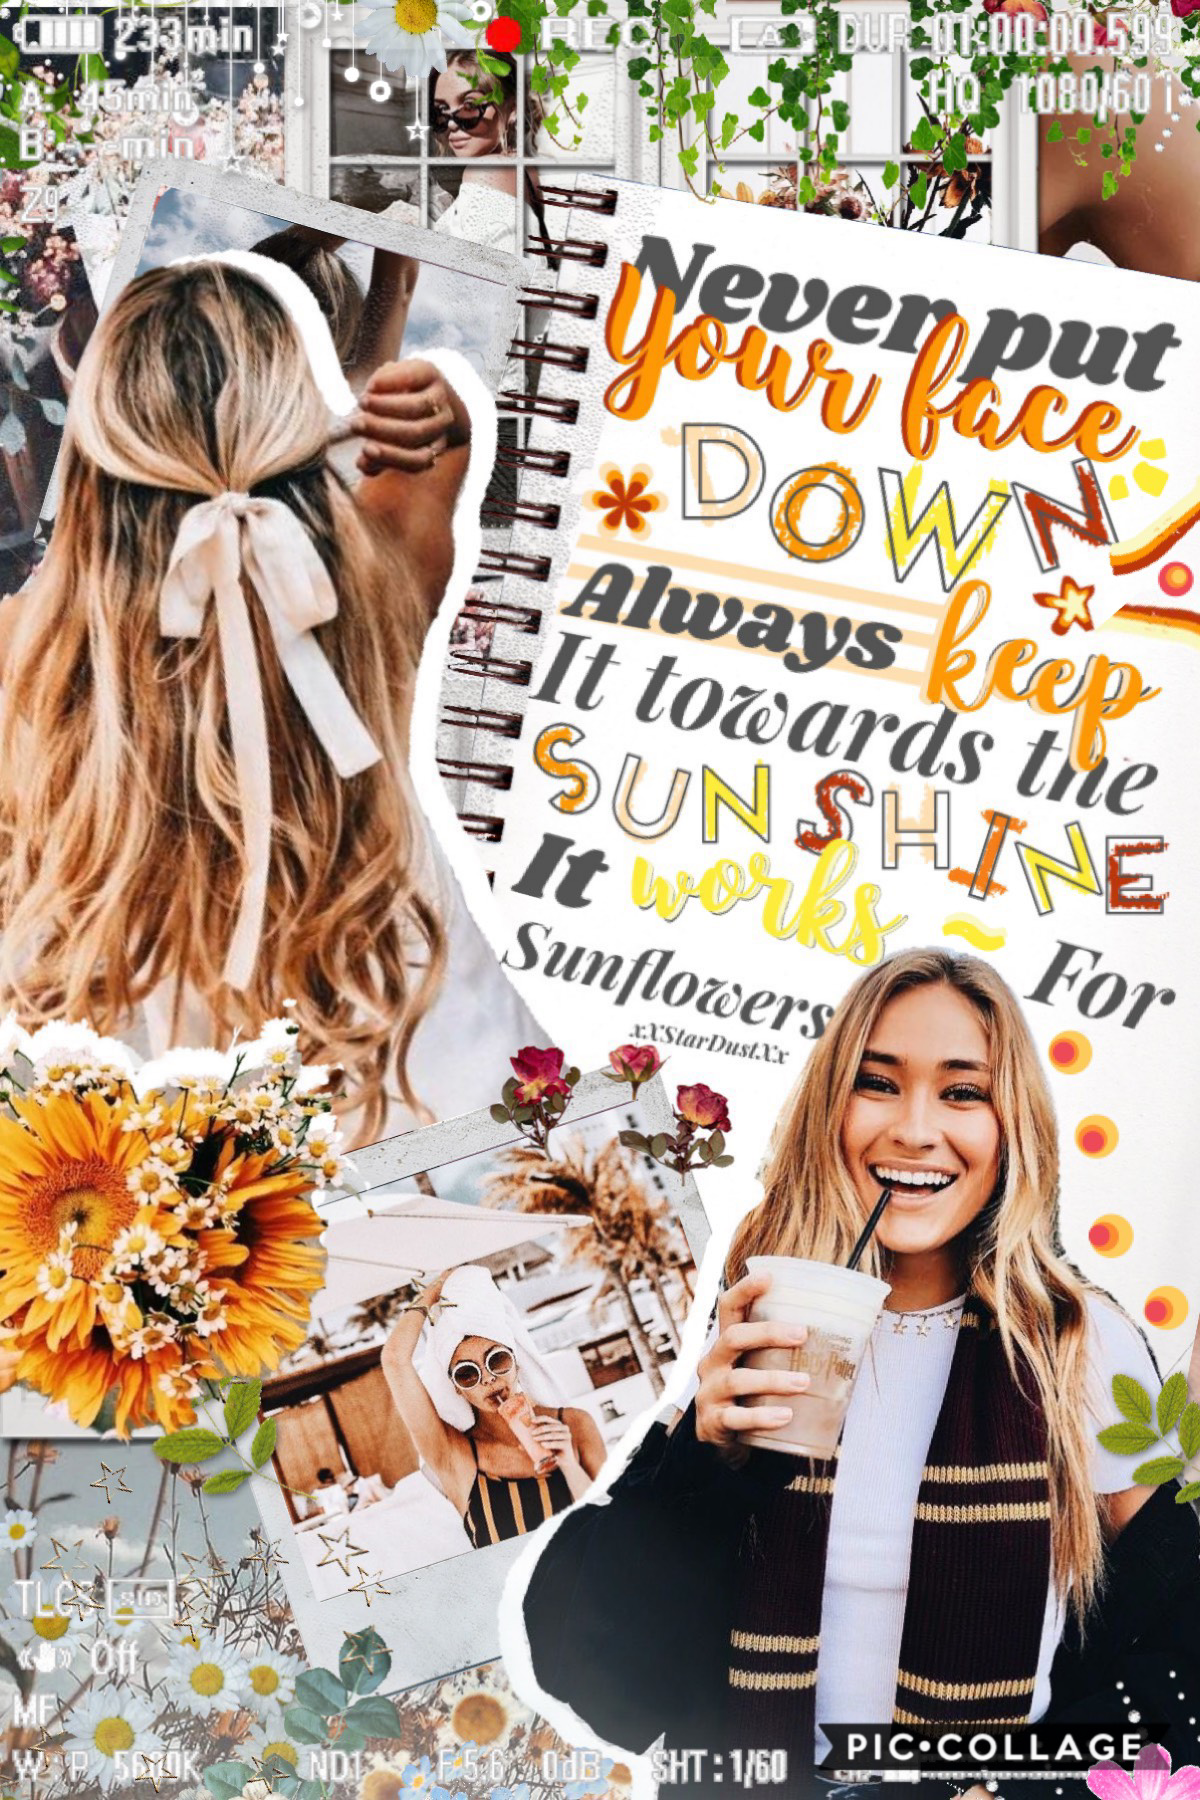  🌻 tap🌻 
Ahhh thank you so much for the feature✨♥️💕💗🎉🎊
I love you all and thank you for the support 🙏 
Have a great summer 🏖 🏝 
QOTD-favorite flower 🌸 🌺 🌹 
AOTD-Sunflower 🌻🌻🌻♥️💕✨💗